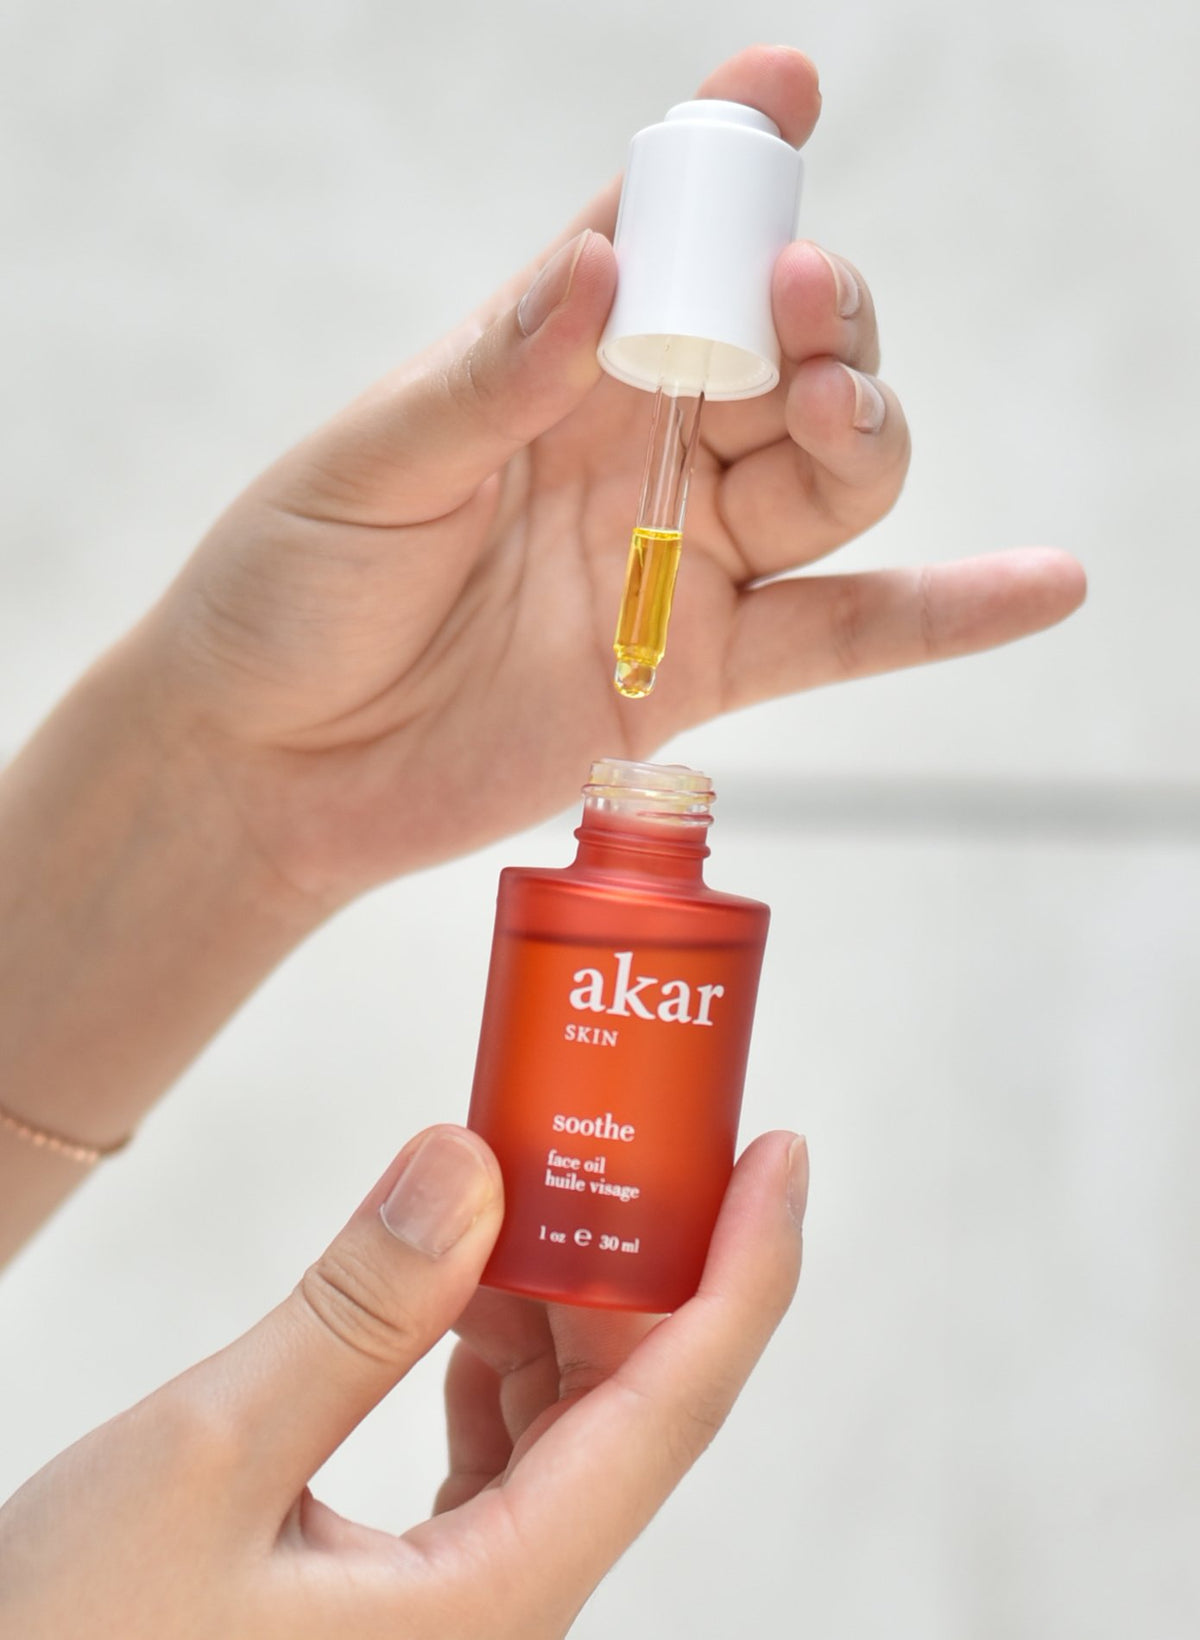 Akar Skin, Soothe Face Oil, hand, model, dropper, texture, skincare, lifestyle, photography